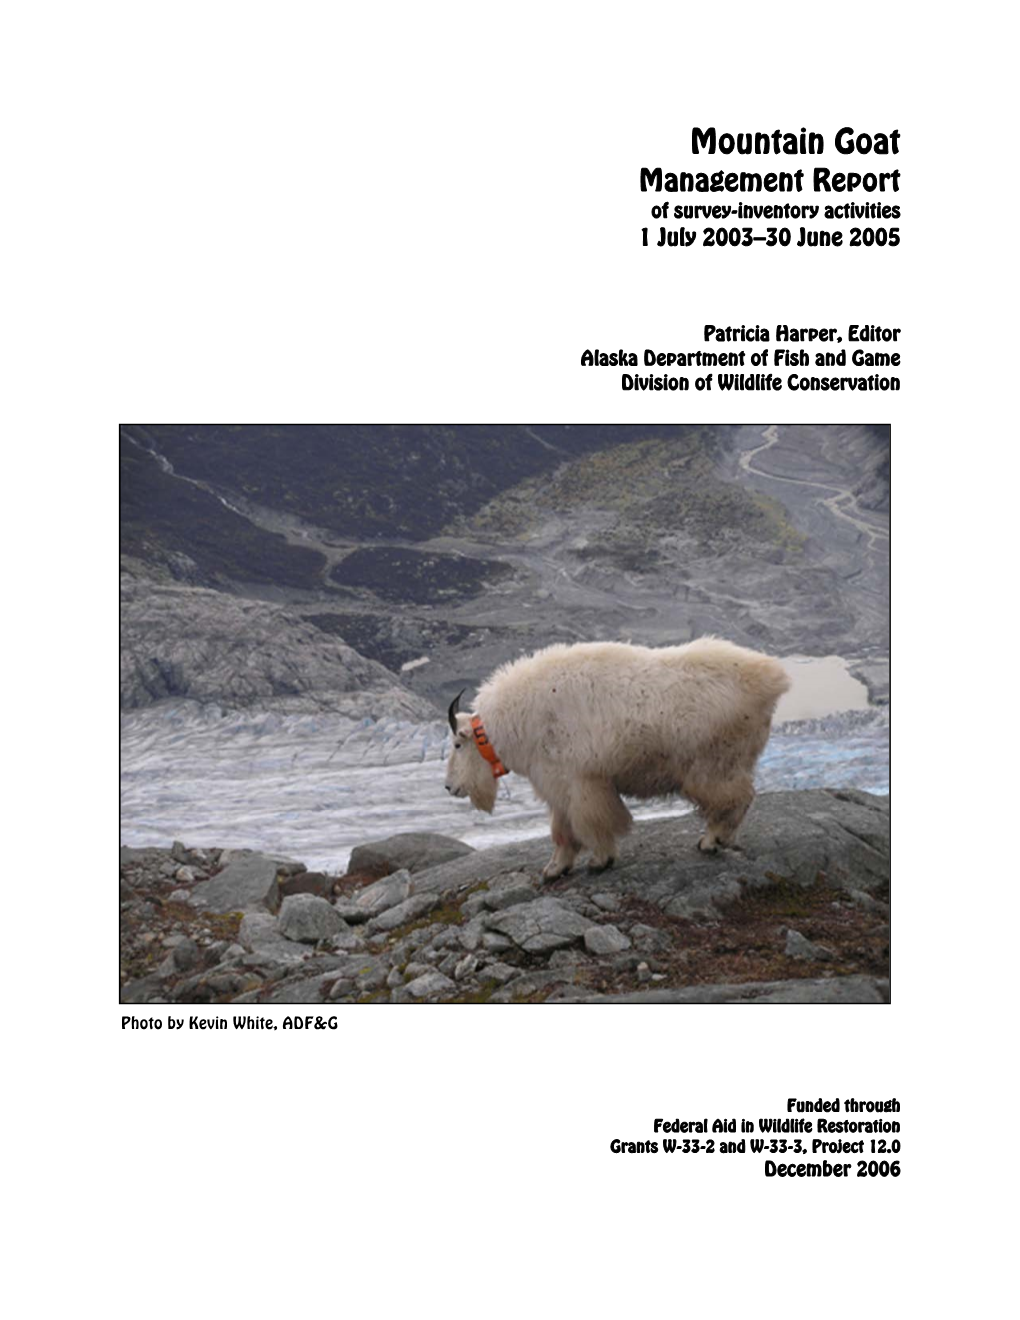 Mountain Goat Management Report of Survey-Inventory Activities, 1 July 2003-30 June 2005